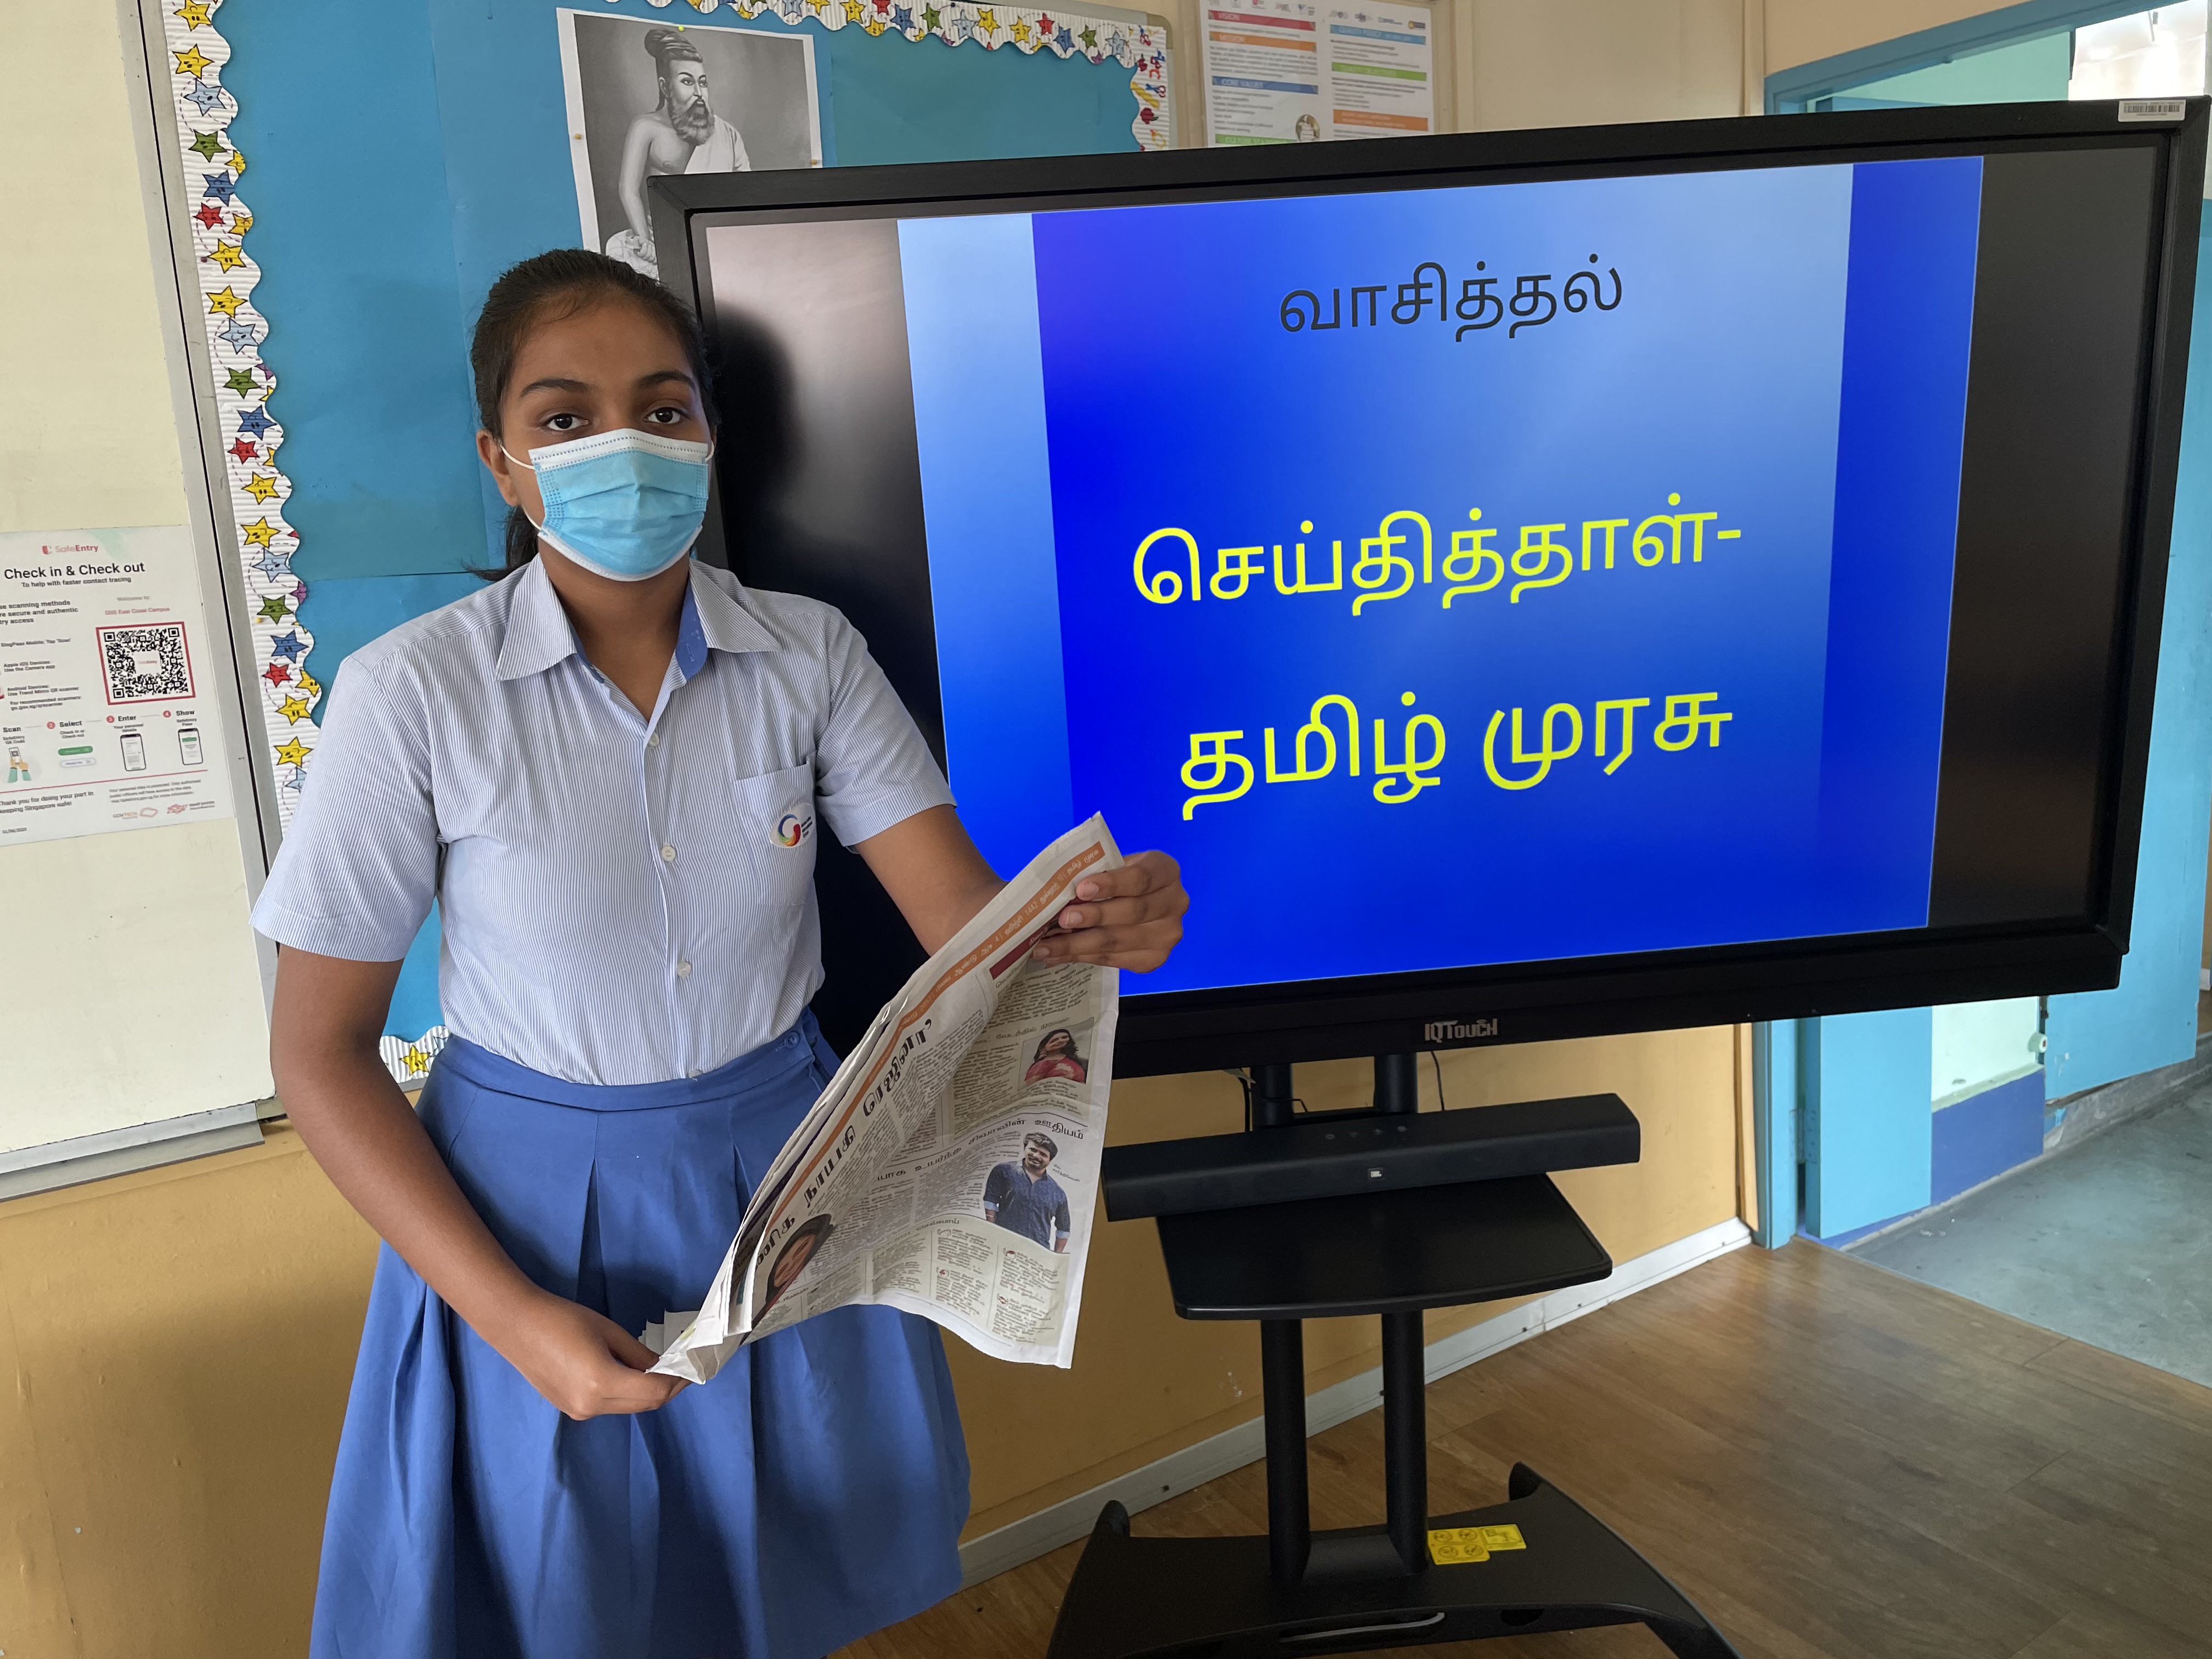 Student presents the history of Tamil language during the literary week